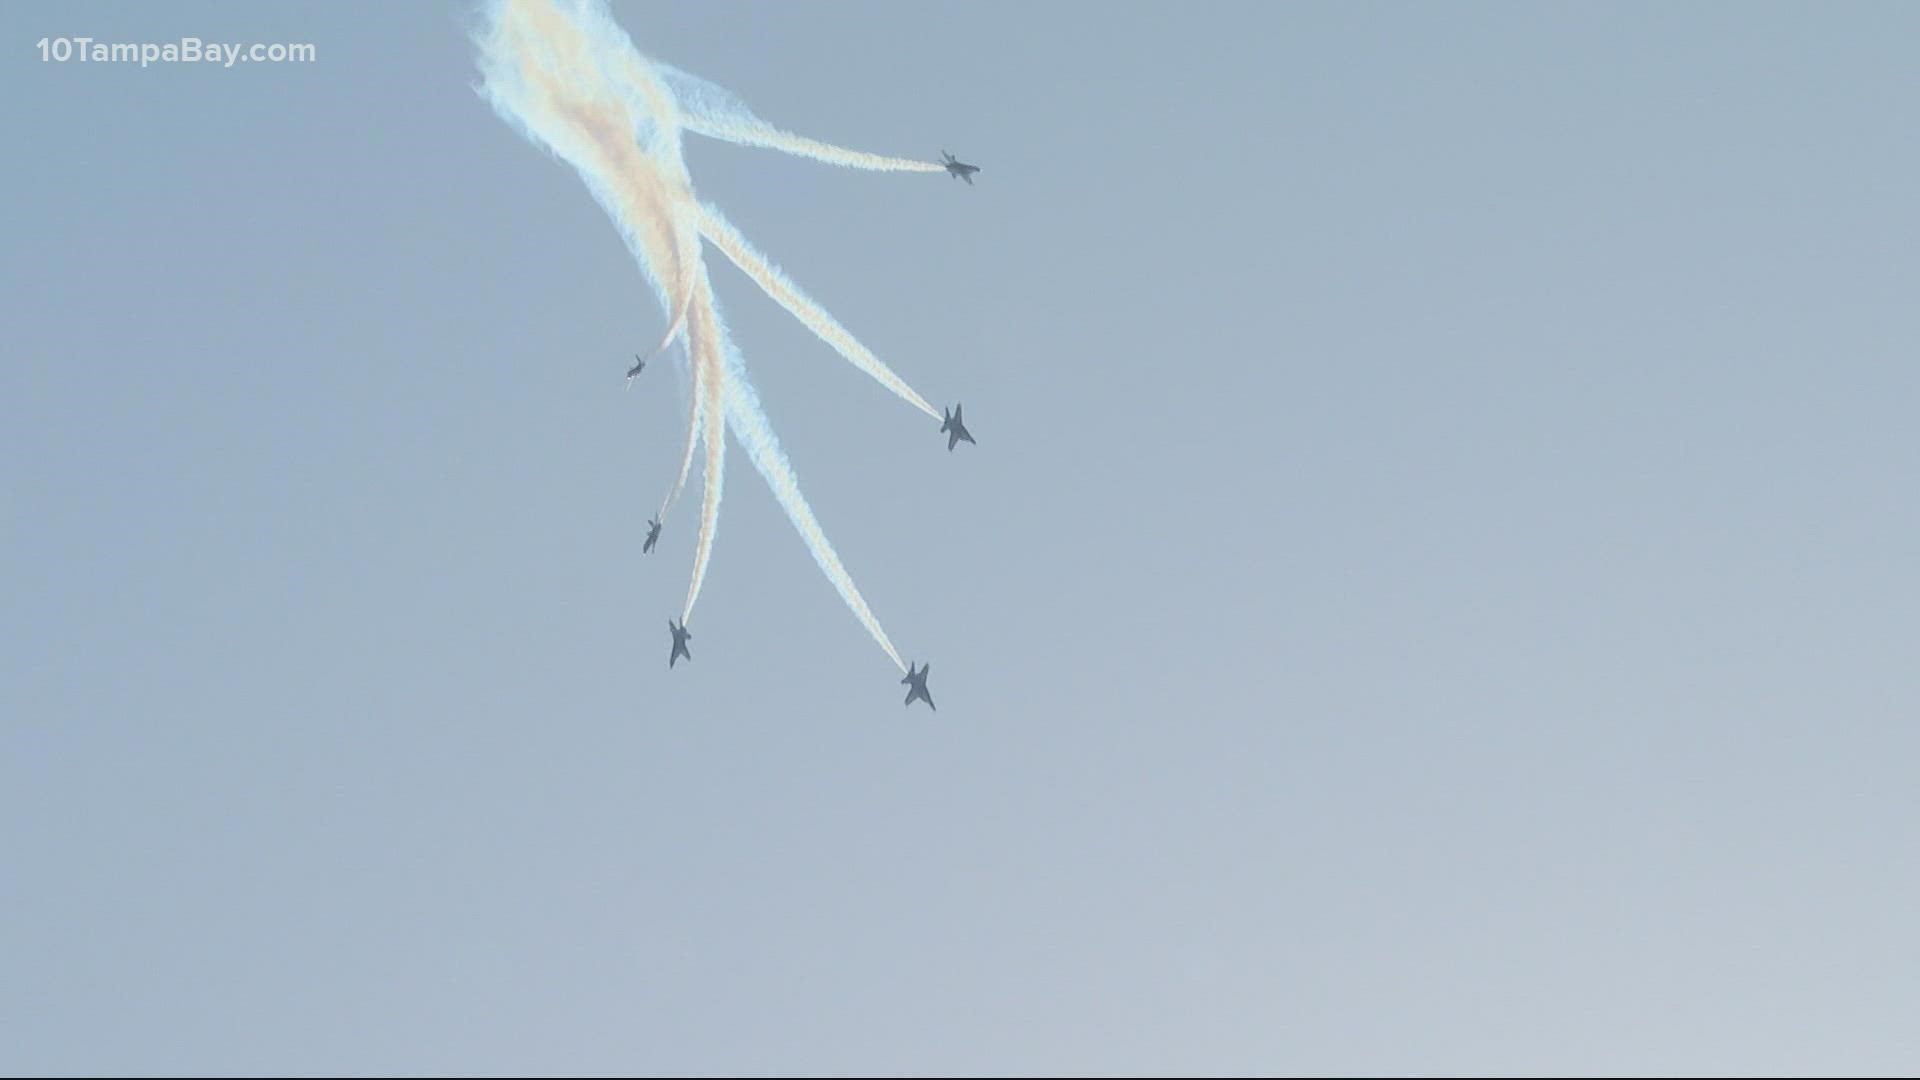 What would the Tampa Bay AirFest be without a sight to see from the U.S. Navy Blue Angels?